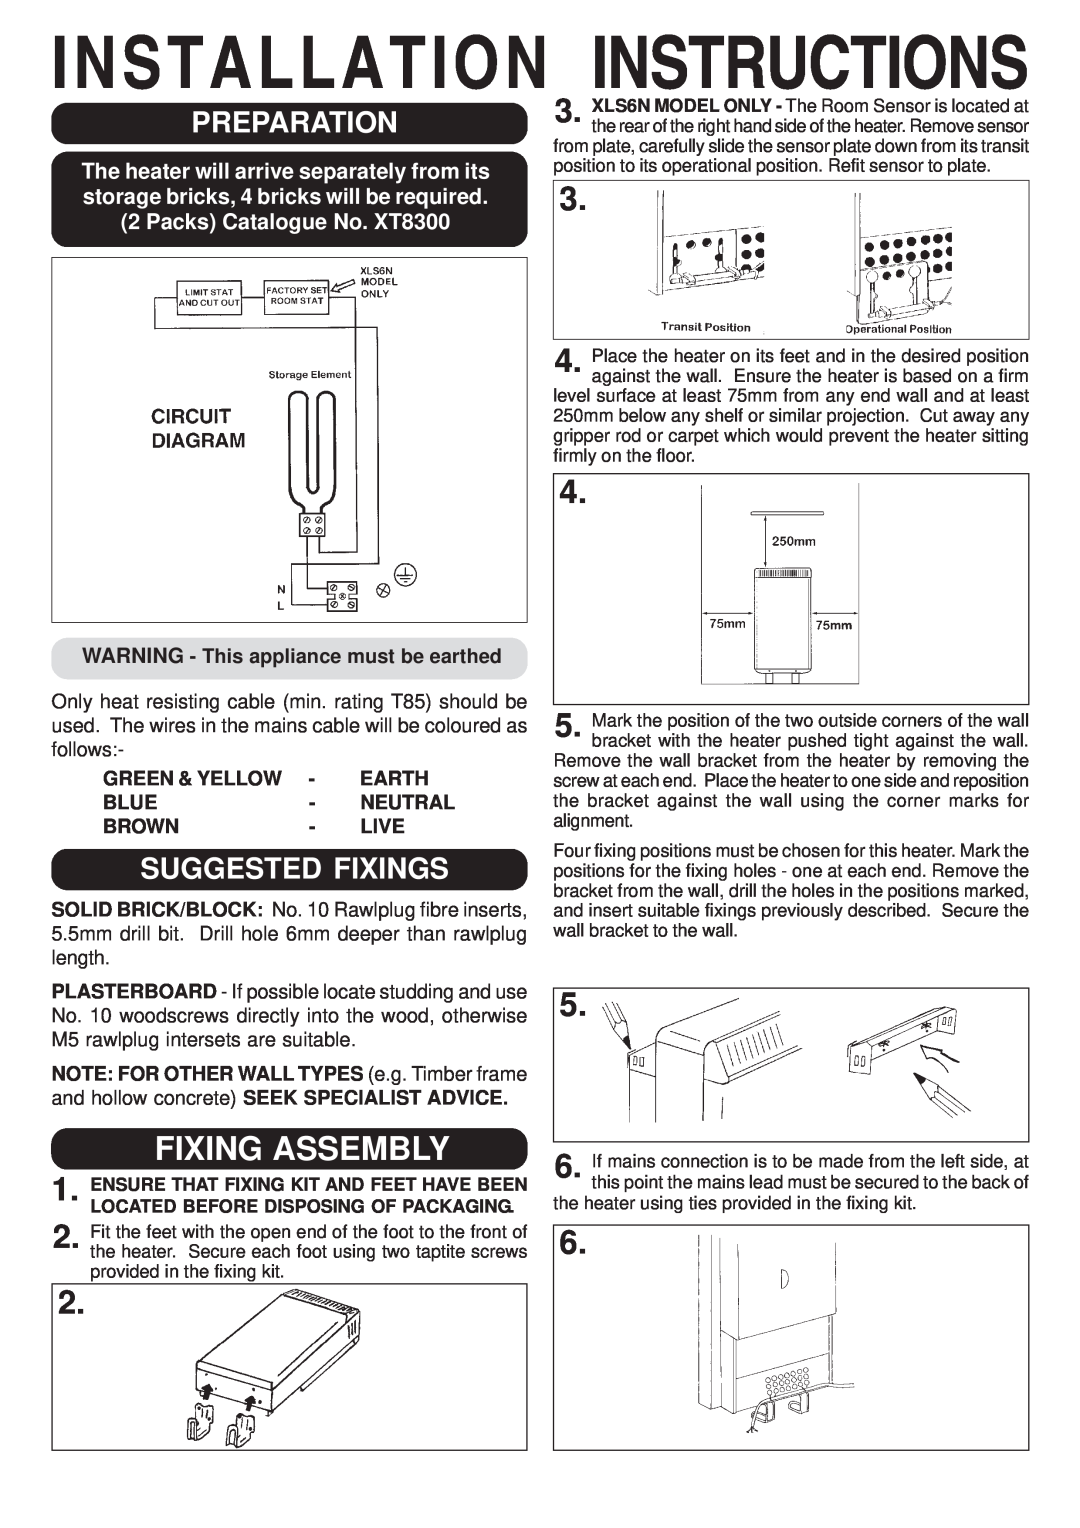 Dimplex XL6N Installation Instructions, Fixing Assembly, Preparation, Suggested Fixings, Packs Catalogue No. XT8300, Earth 